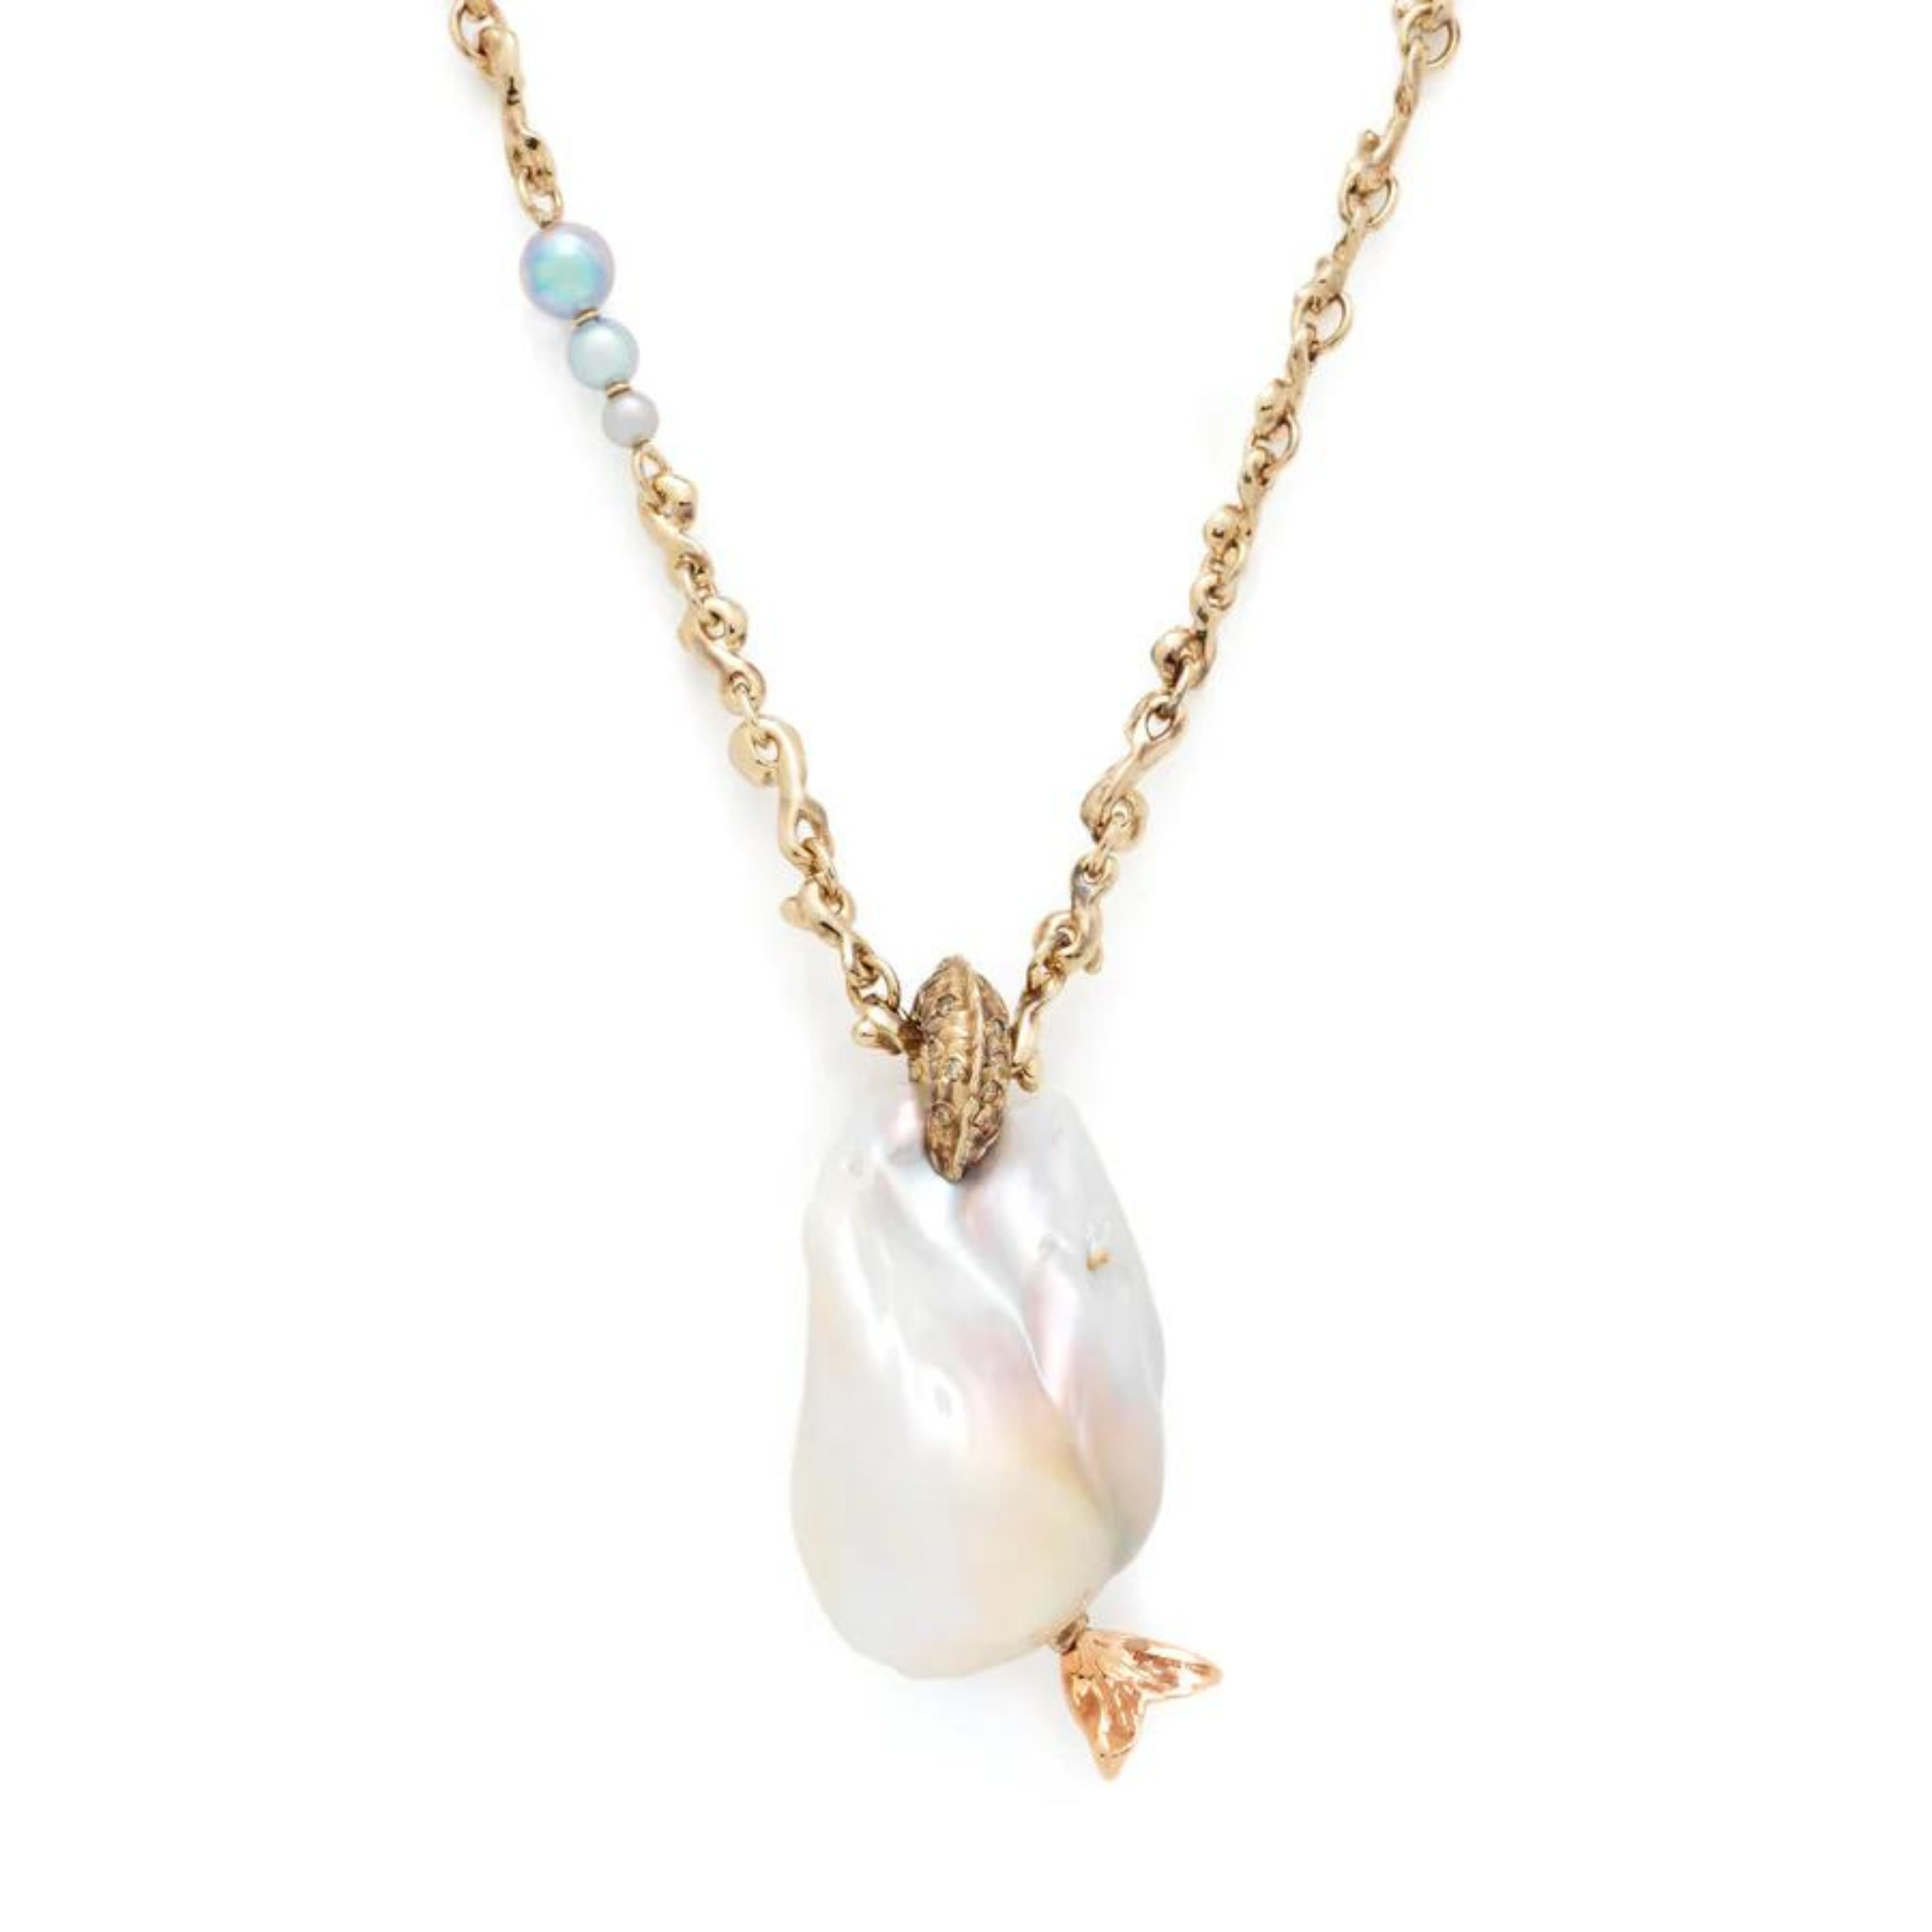 Bibi van der Velden Mermaid Pearl Pendant on Waves Chain. A South Sea baroque pearl has a mermaid's tail crafted from 18k white and rose gold woven into it. Brown diamonds embellish it's tail and the pearl is set on an 18k white gold chain with round grey pearls of varying sizes.